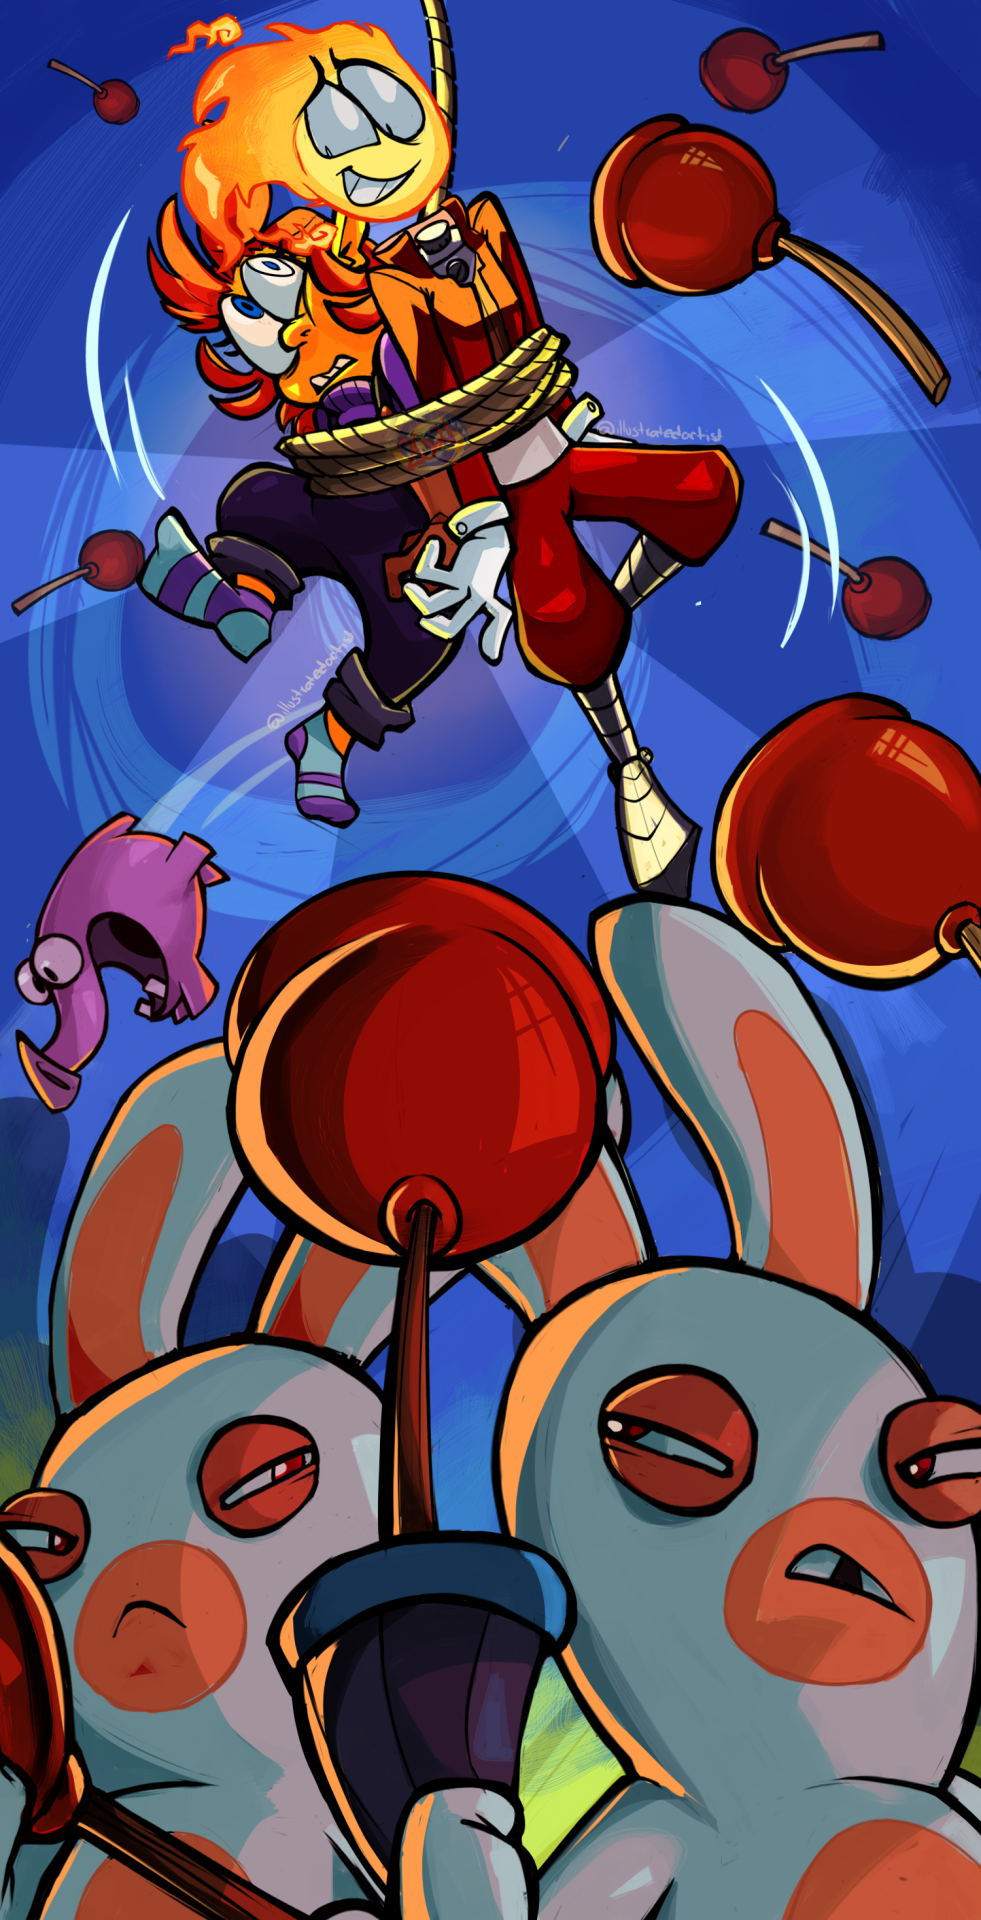 OOPS..? My younger bro and I got sick over the weekend and spent most of our time playing games together, and one of those games being Rayman Raving Rabbids for the PS2! It was so much fun, we hadn’t played the game in years but everything was so nostalgic #rayman #rayman raving rabbids #raving rabbids#rabbids#fanart#original character#my ocs#my art#digital illustration#digital art#cartoon#ps2 games#ps2 nostalgia